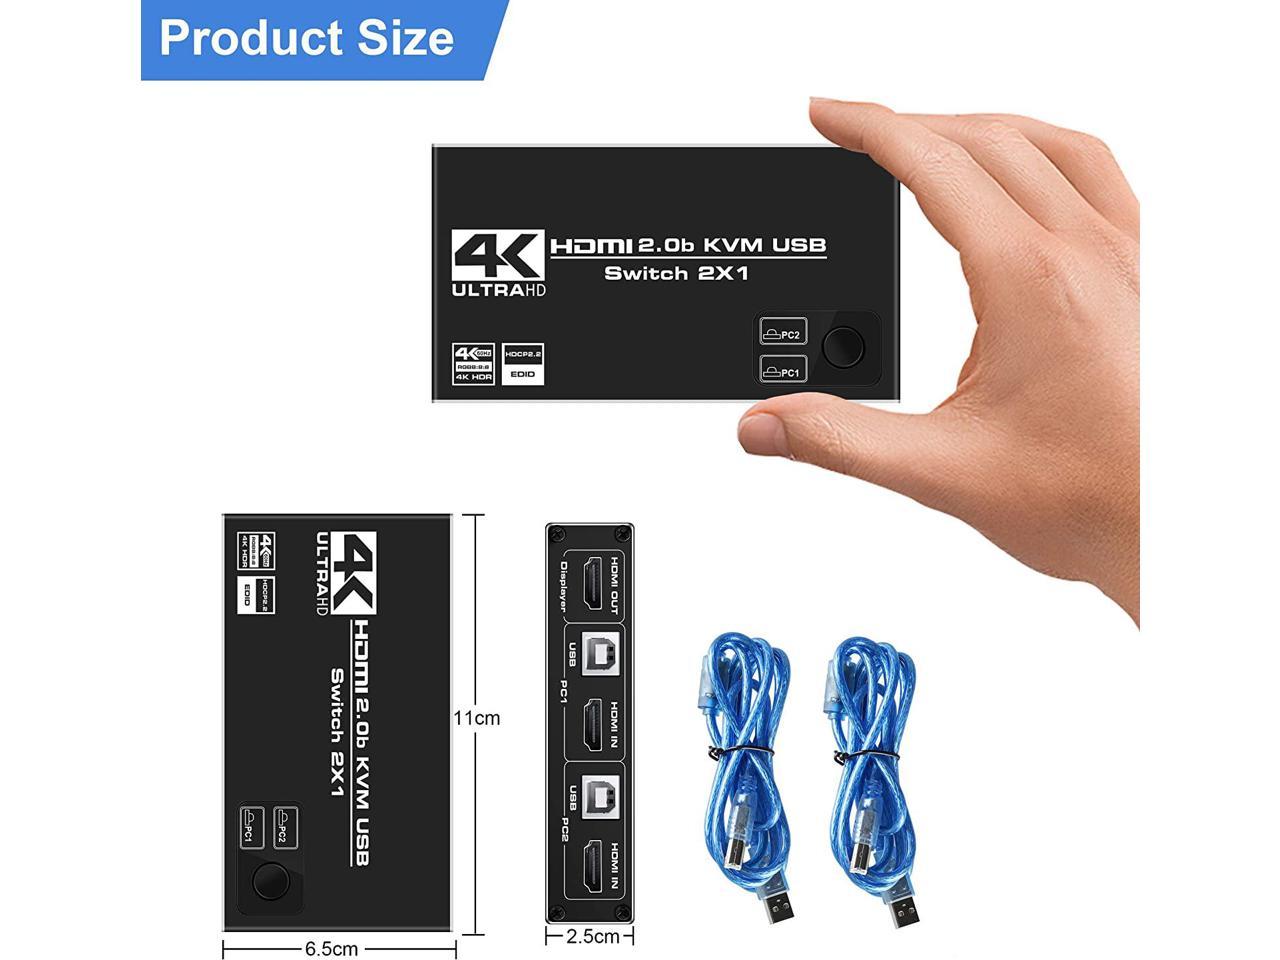 HF-HKU212: HDMI KVM Switch, 4K@60Hz USB Switch 2x1 HDMI2.0 Ports + 3X USB KVM Ports, Share 2 Computers to one Monitor, Support Wireless Keyboard and Mouse, USB Disk, Printer, USB Camera (Included 2 USB Cable)